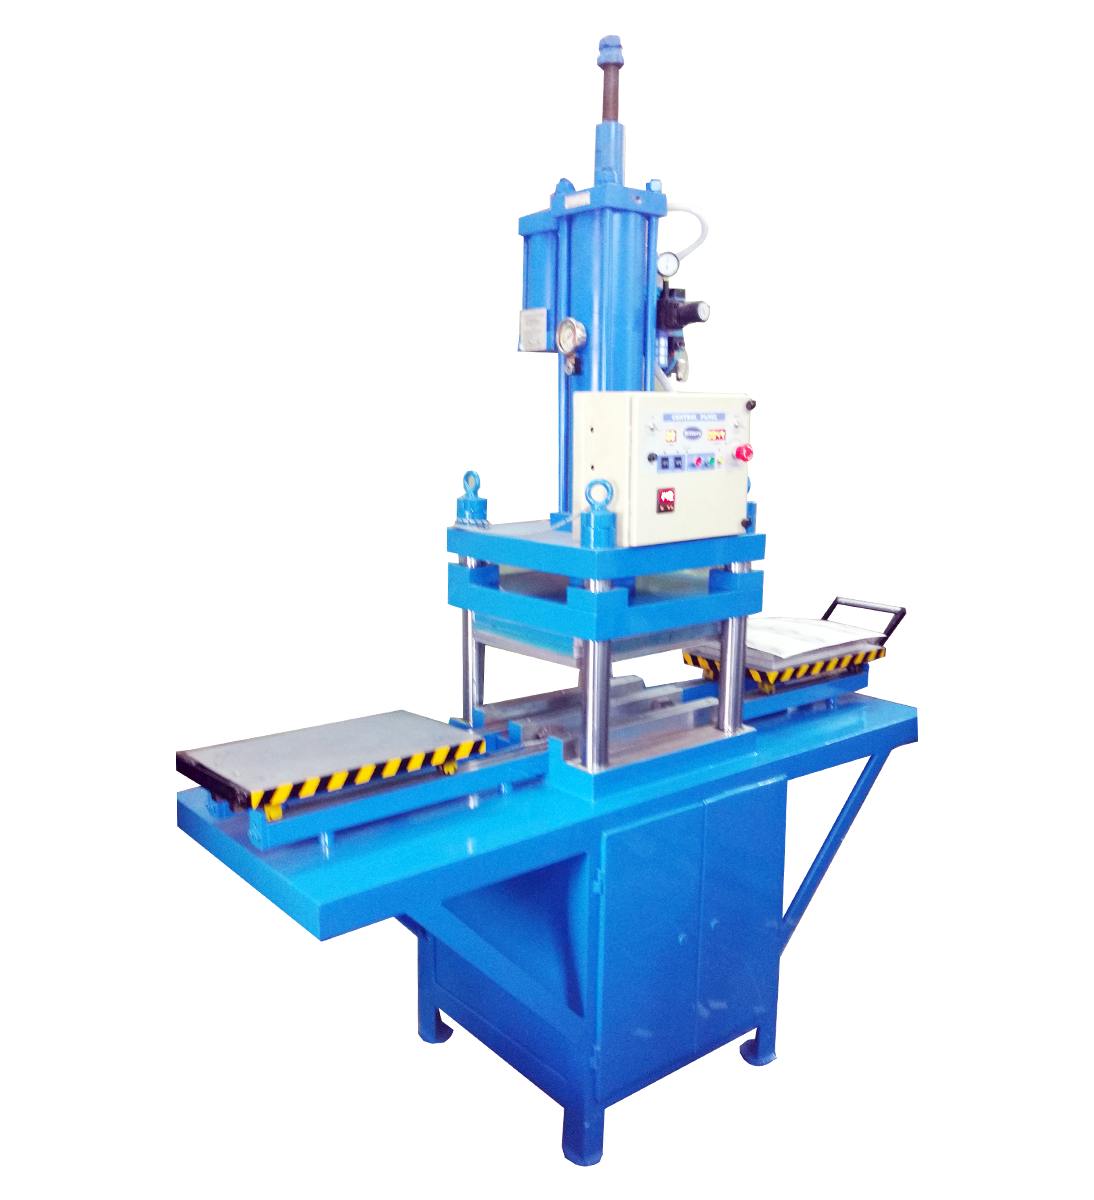 ritters Hydro-Pneumatic Press with Trolley for Blister Cutting & Sealing